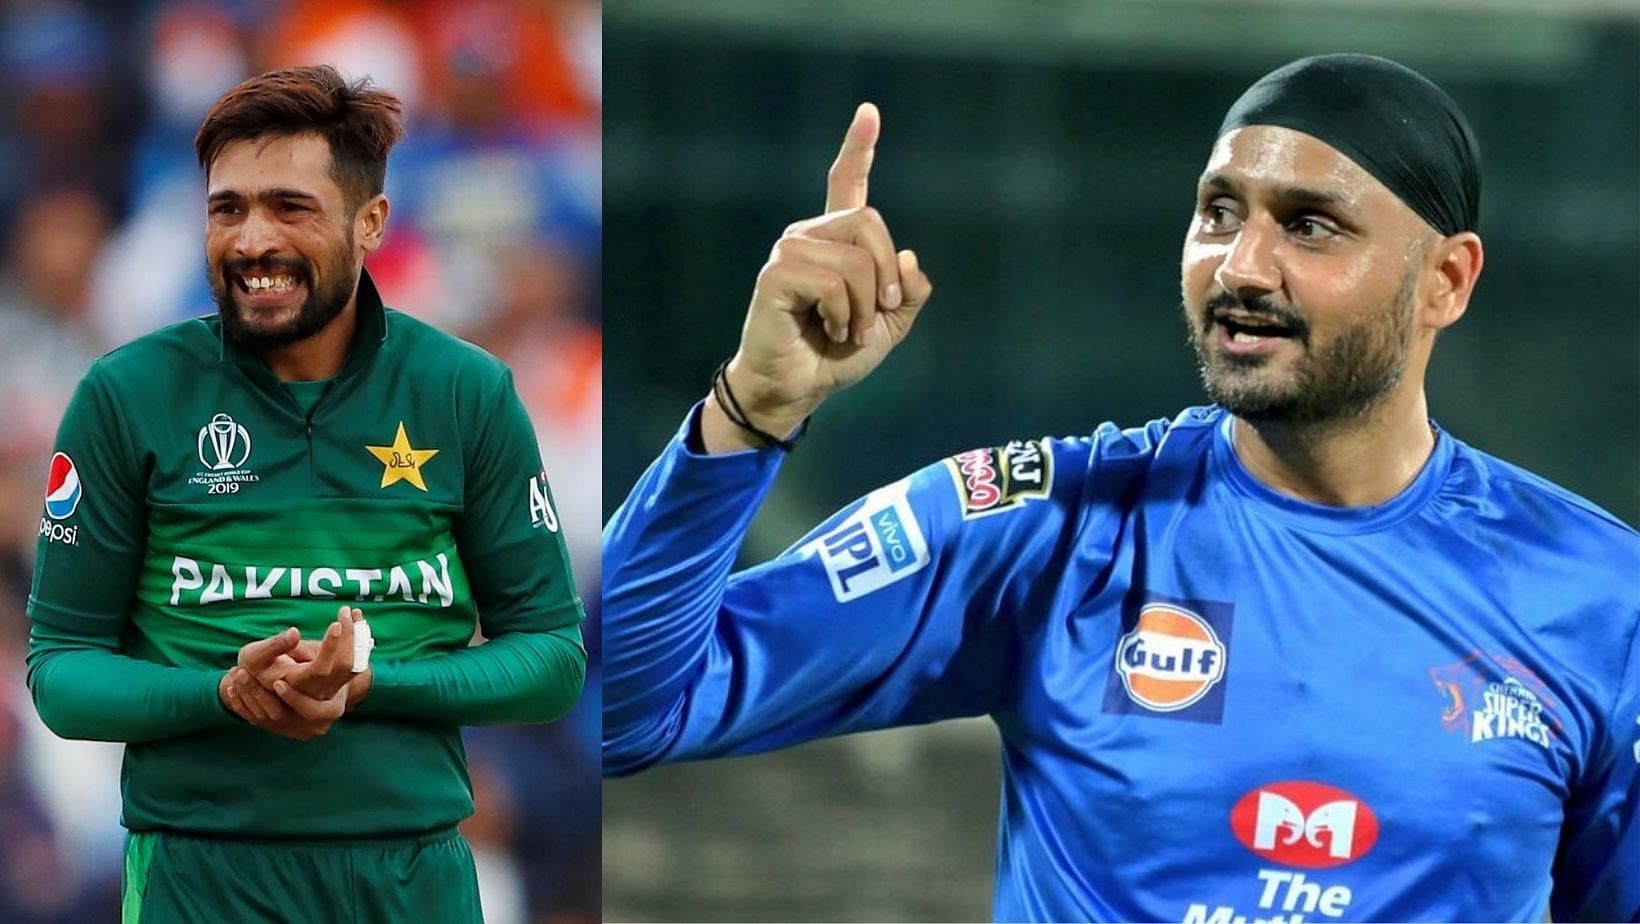 Harbhajan Singh (R) added more fuel to the verbal battle with Mohammad Amir (L) on Wednesday.